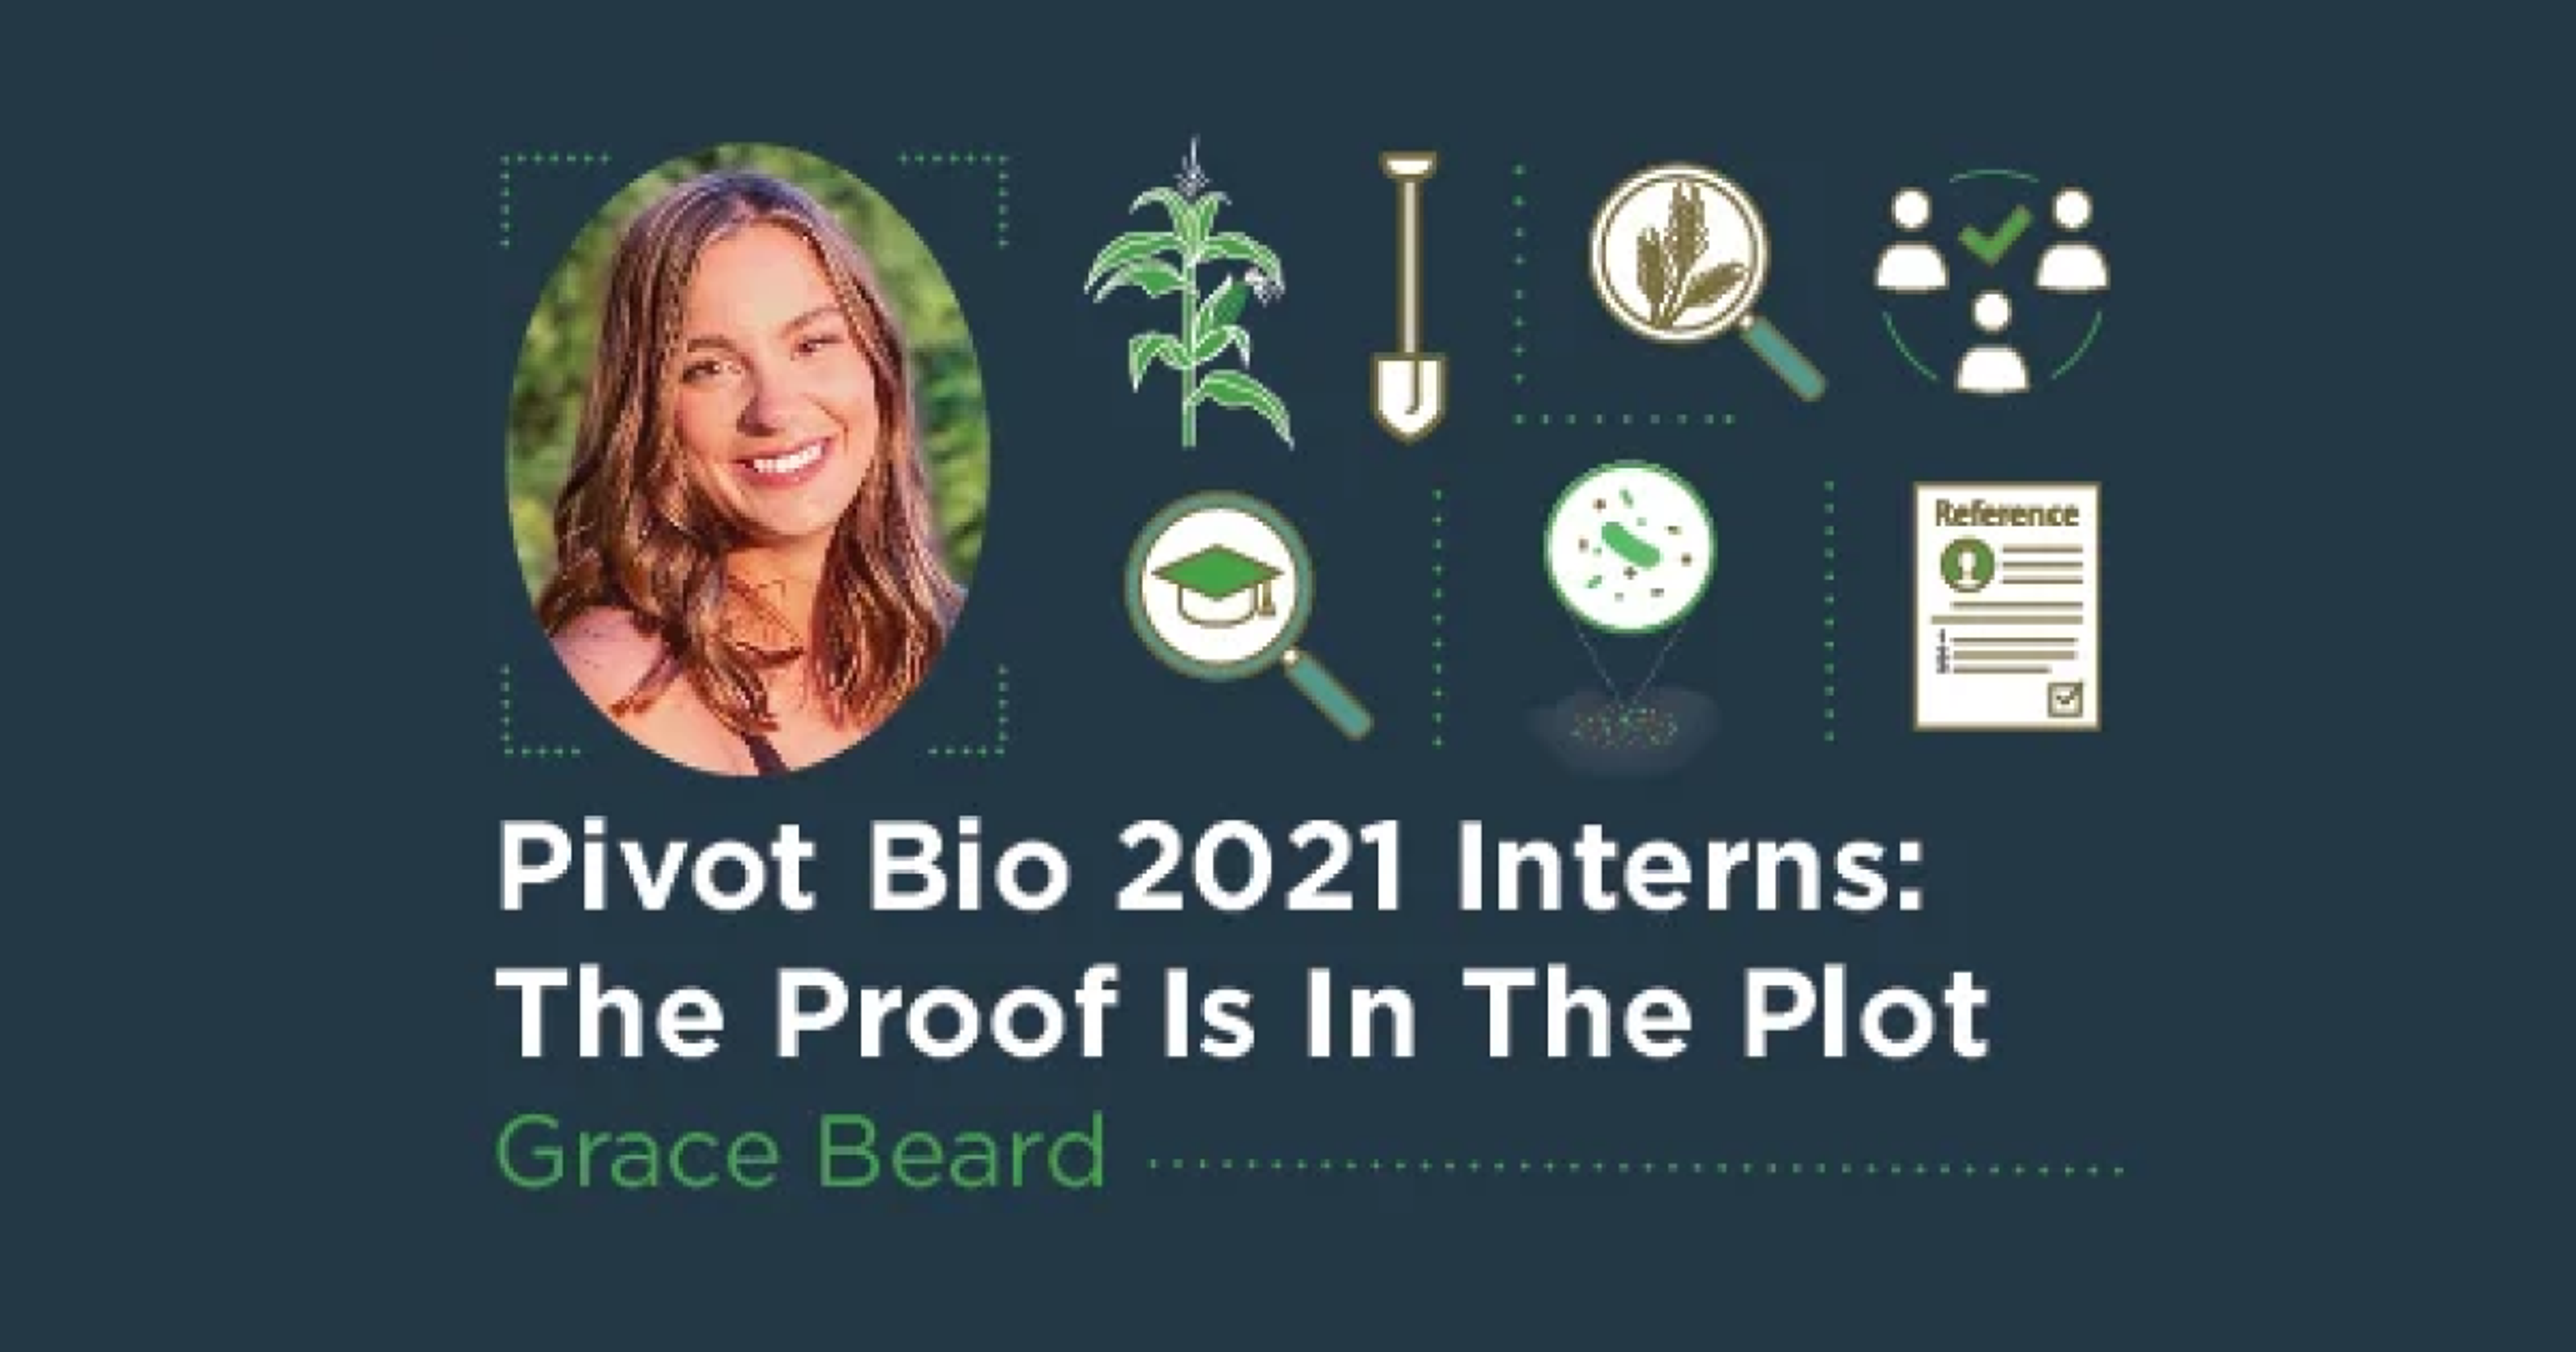 Pivot Bio 2021 Interns: The Proof is in the Plot